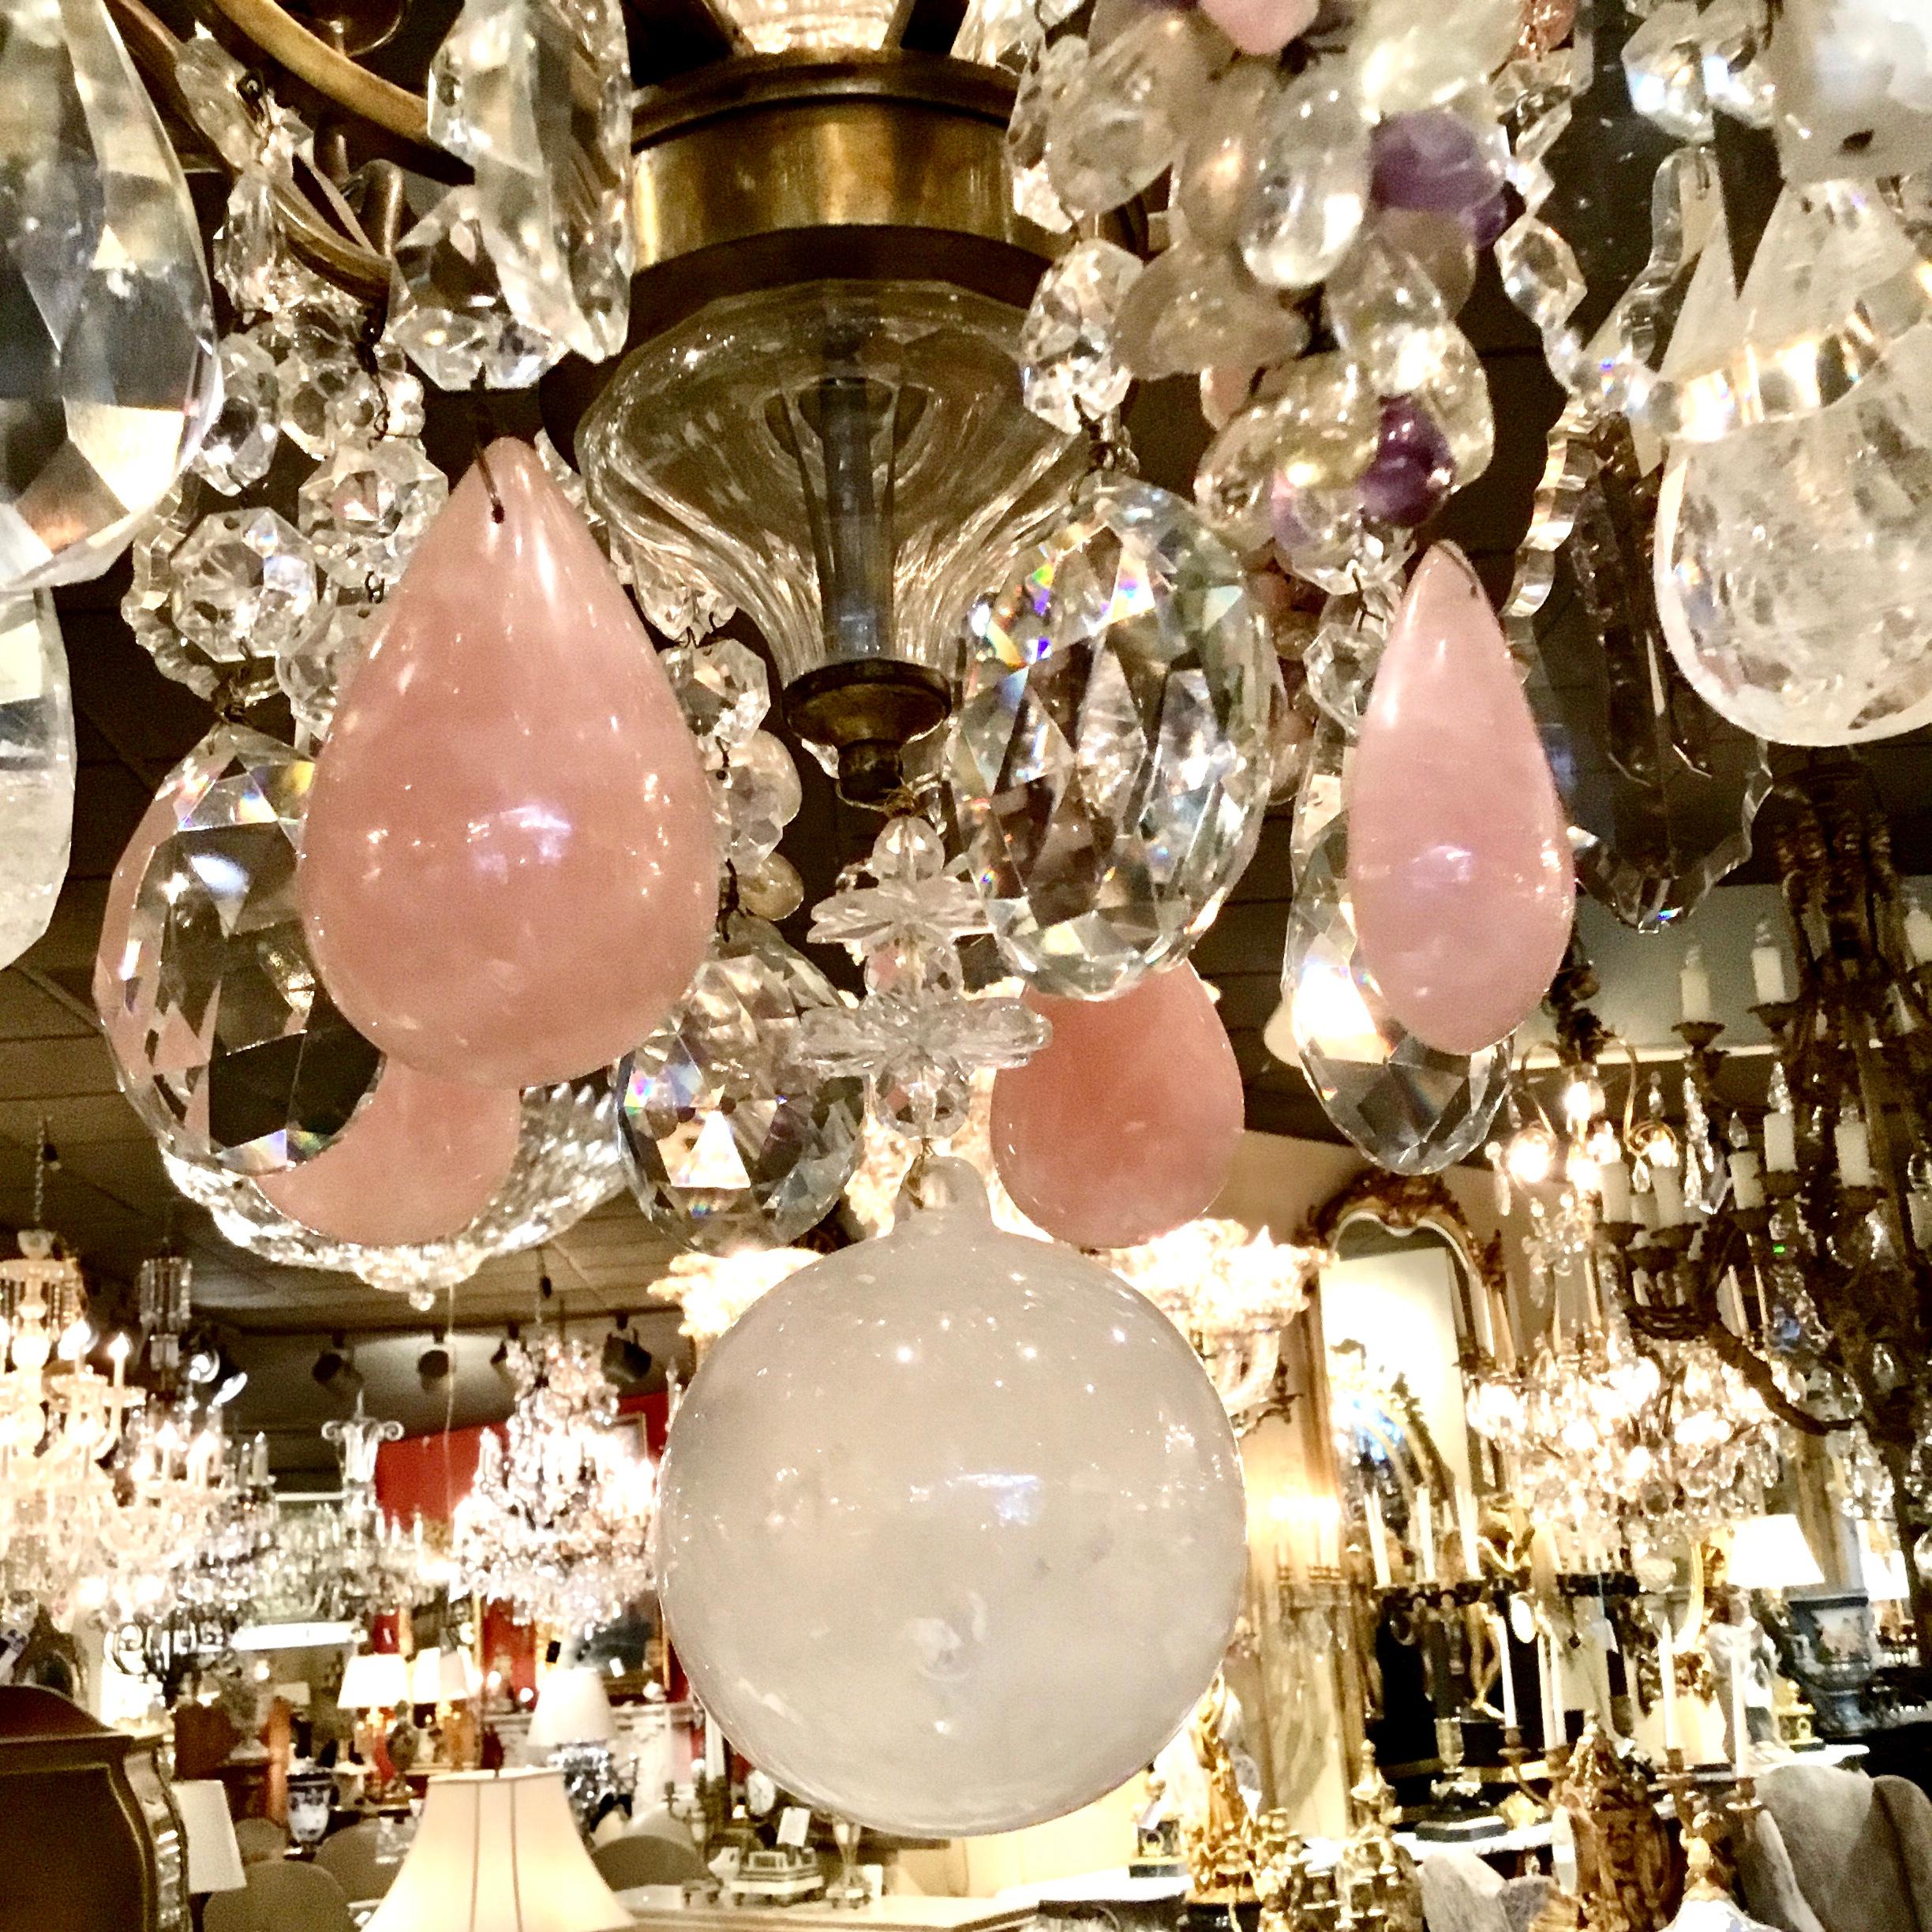 Large and spectacular Baccarat style chandelier with multicolored
Crystals and grape-like clusters in amethyst and rock crystals.
Twelve lights are around the perimeter of this piece and one light
Is centered inside a crystal finial. Four large